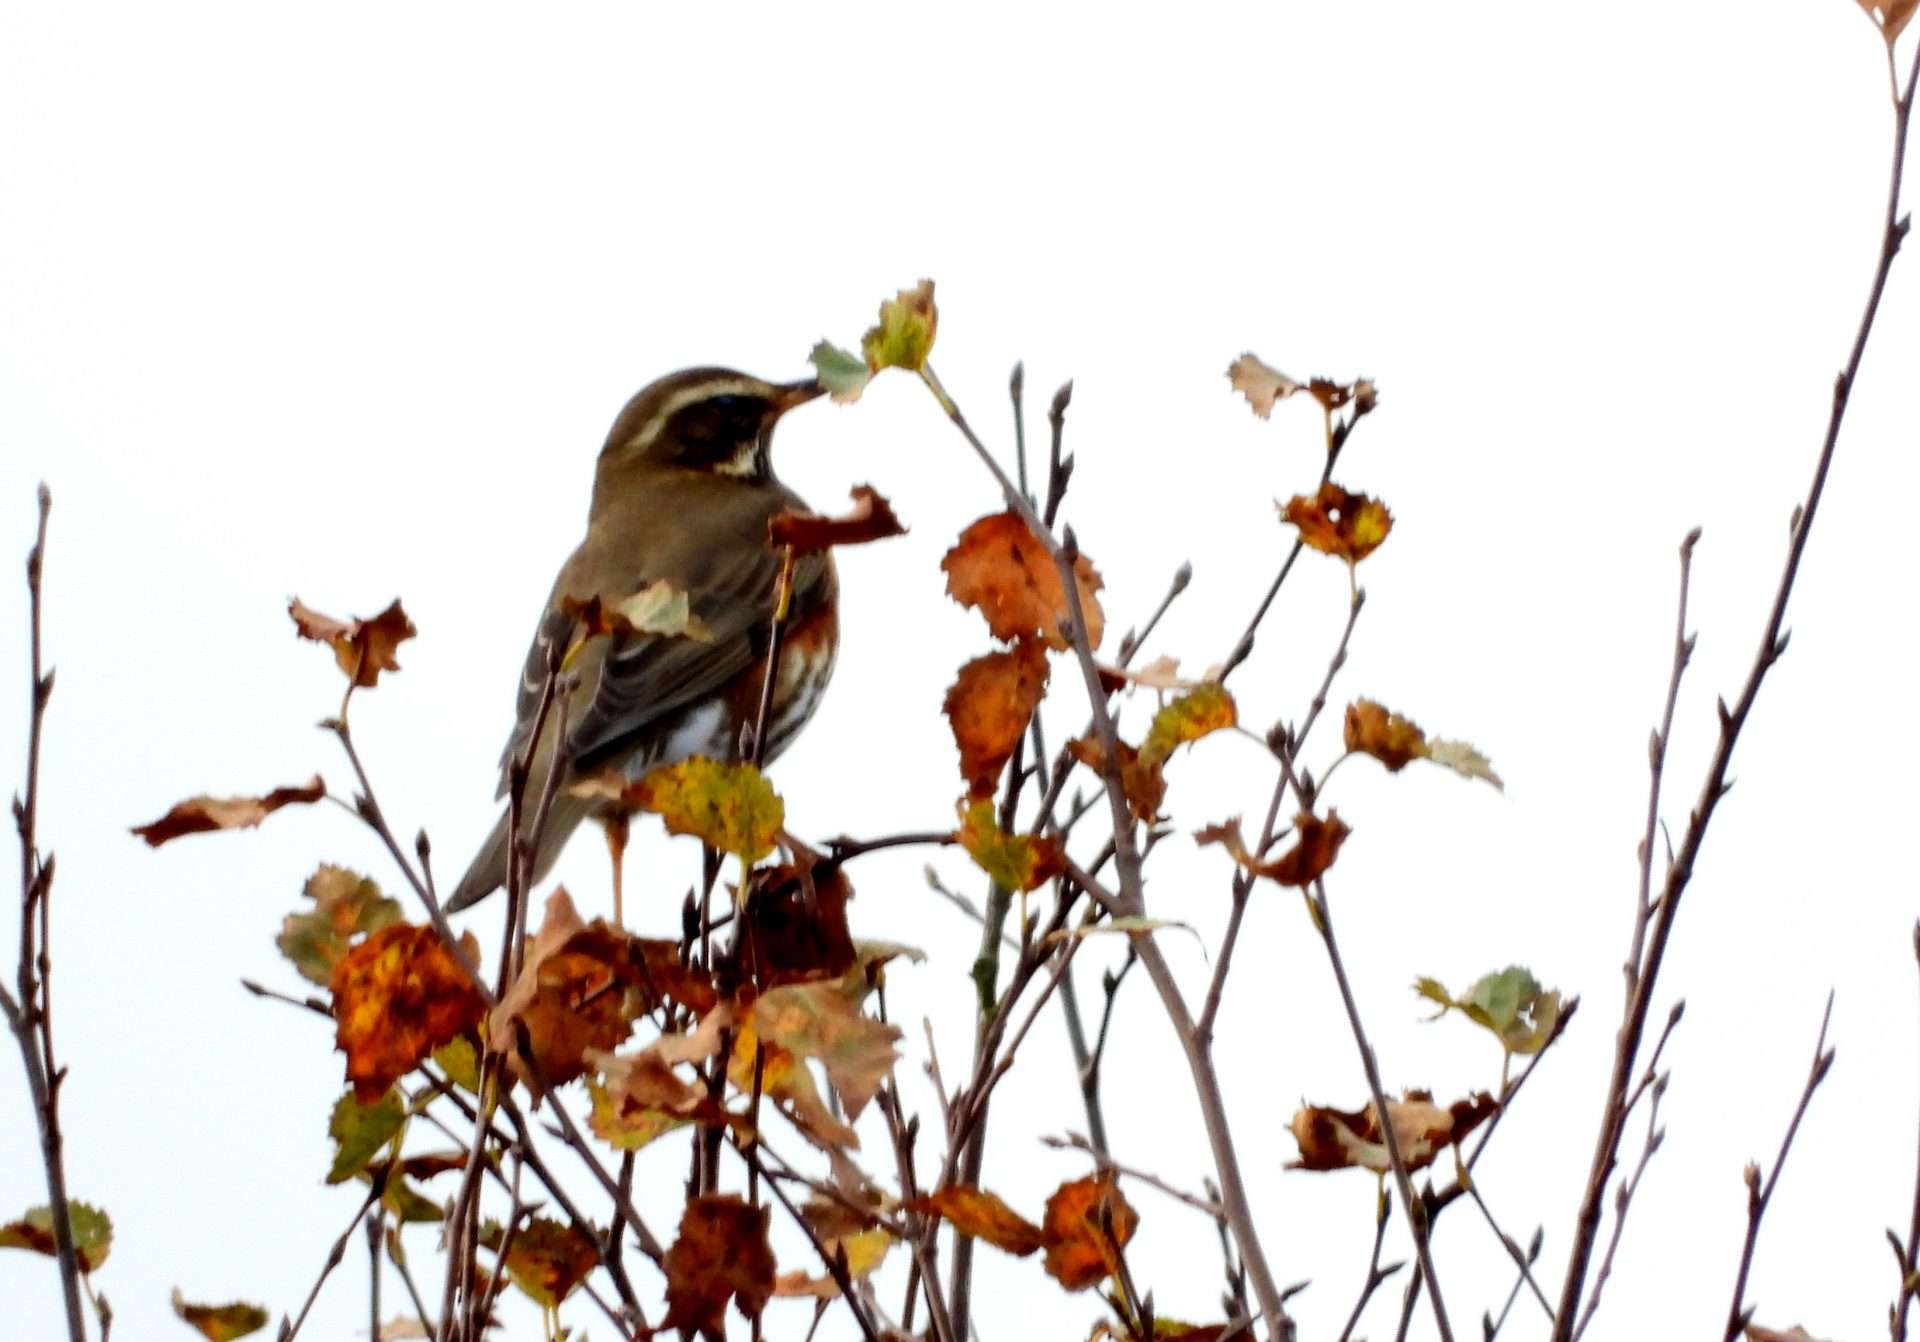 Redwing by Kenneth Bradley at Ideford Common